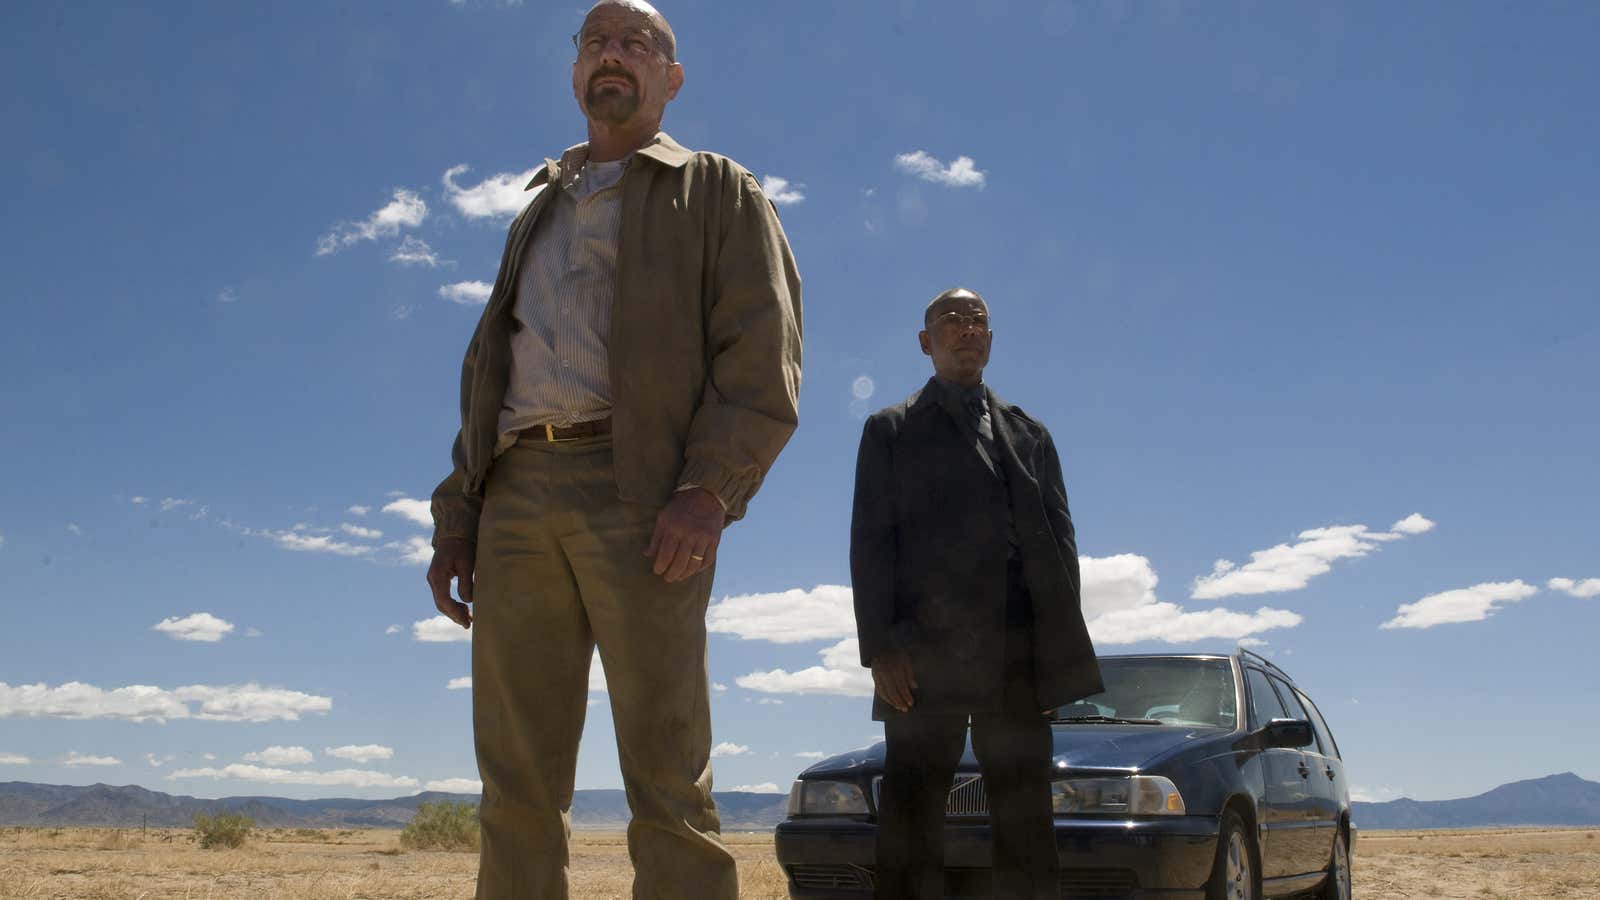 10 years ago, Breaking Bad produced its greatest episode ever